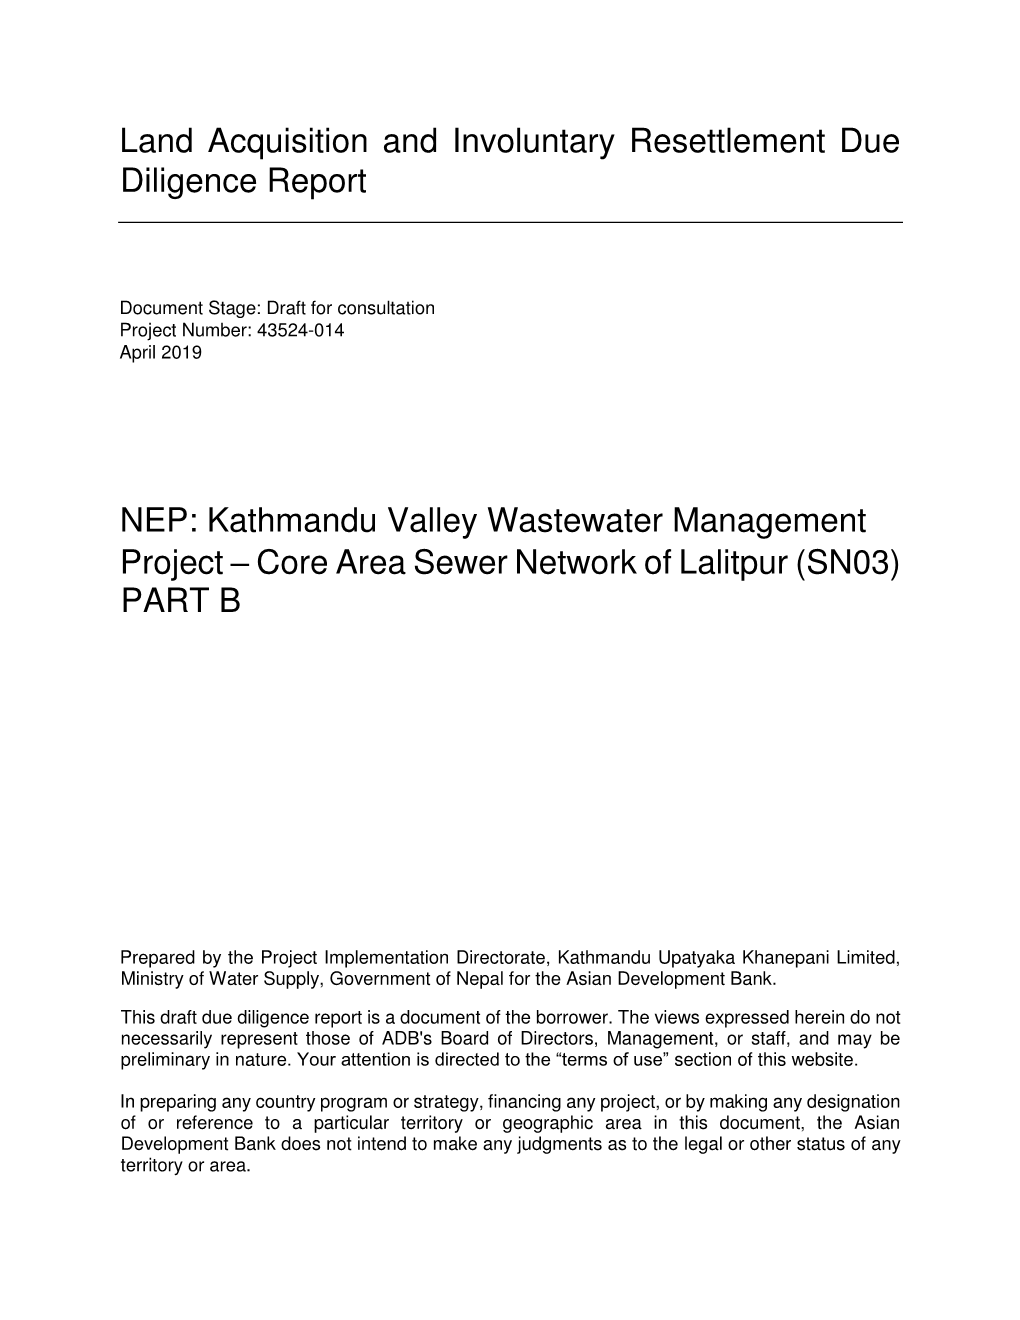 Kathmandu Valley Wastewater Management Project – Core Area Sewer Network of Lalitpur (SN03) PART B